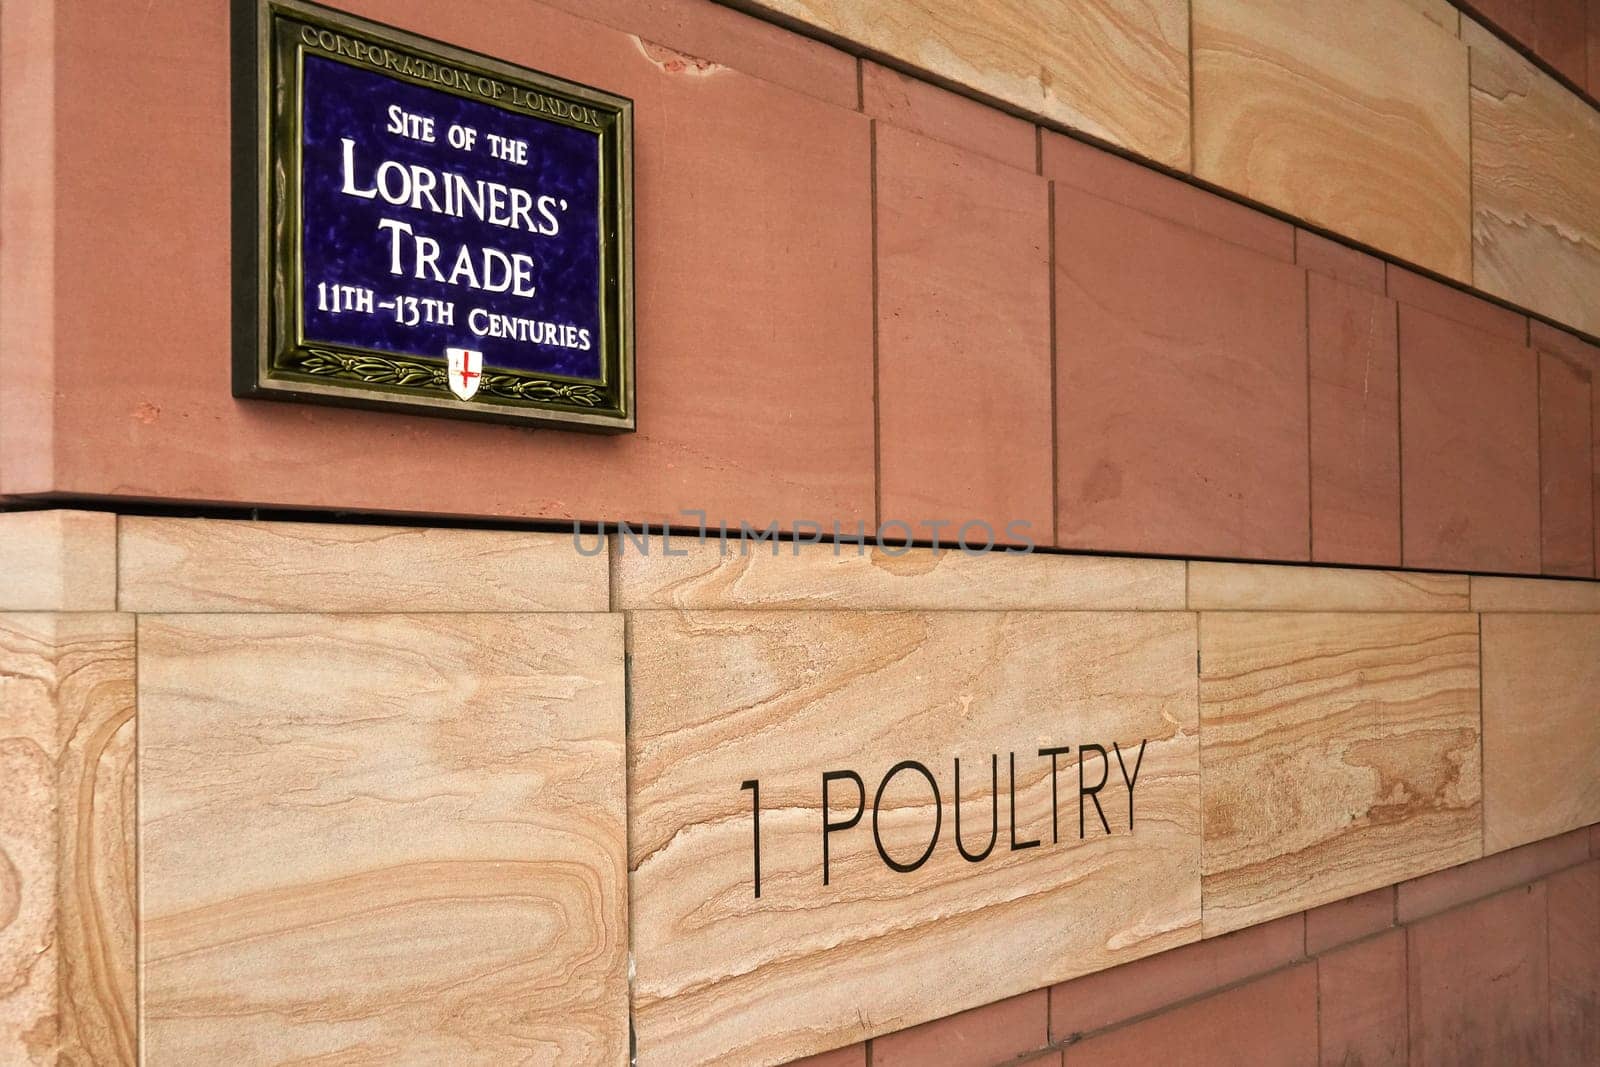 London, United Kingdom - February 02, 2019: Site of Loriners' Trade sign on the wall of No 1 Poultry in London